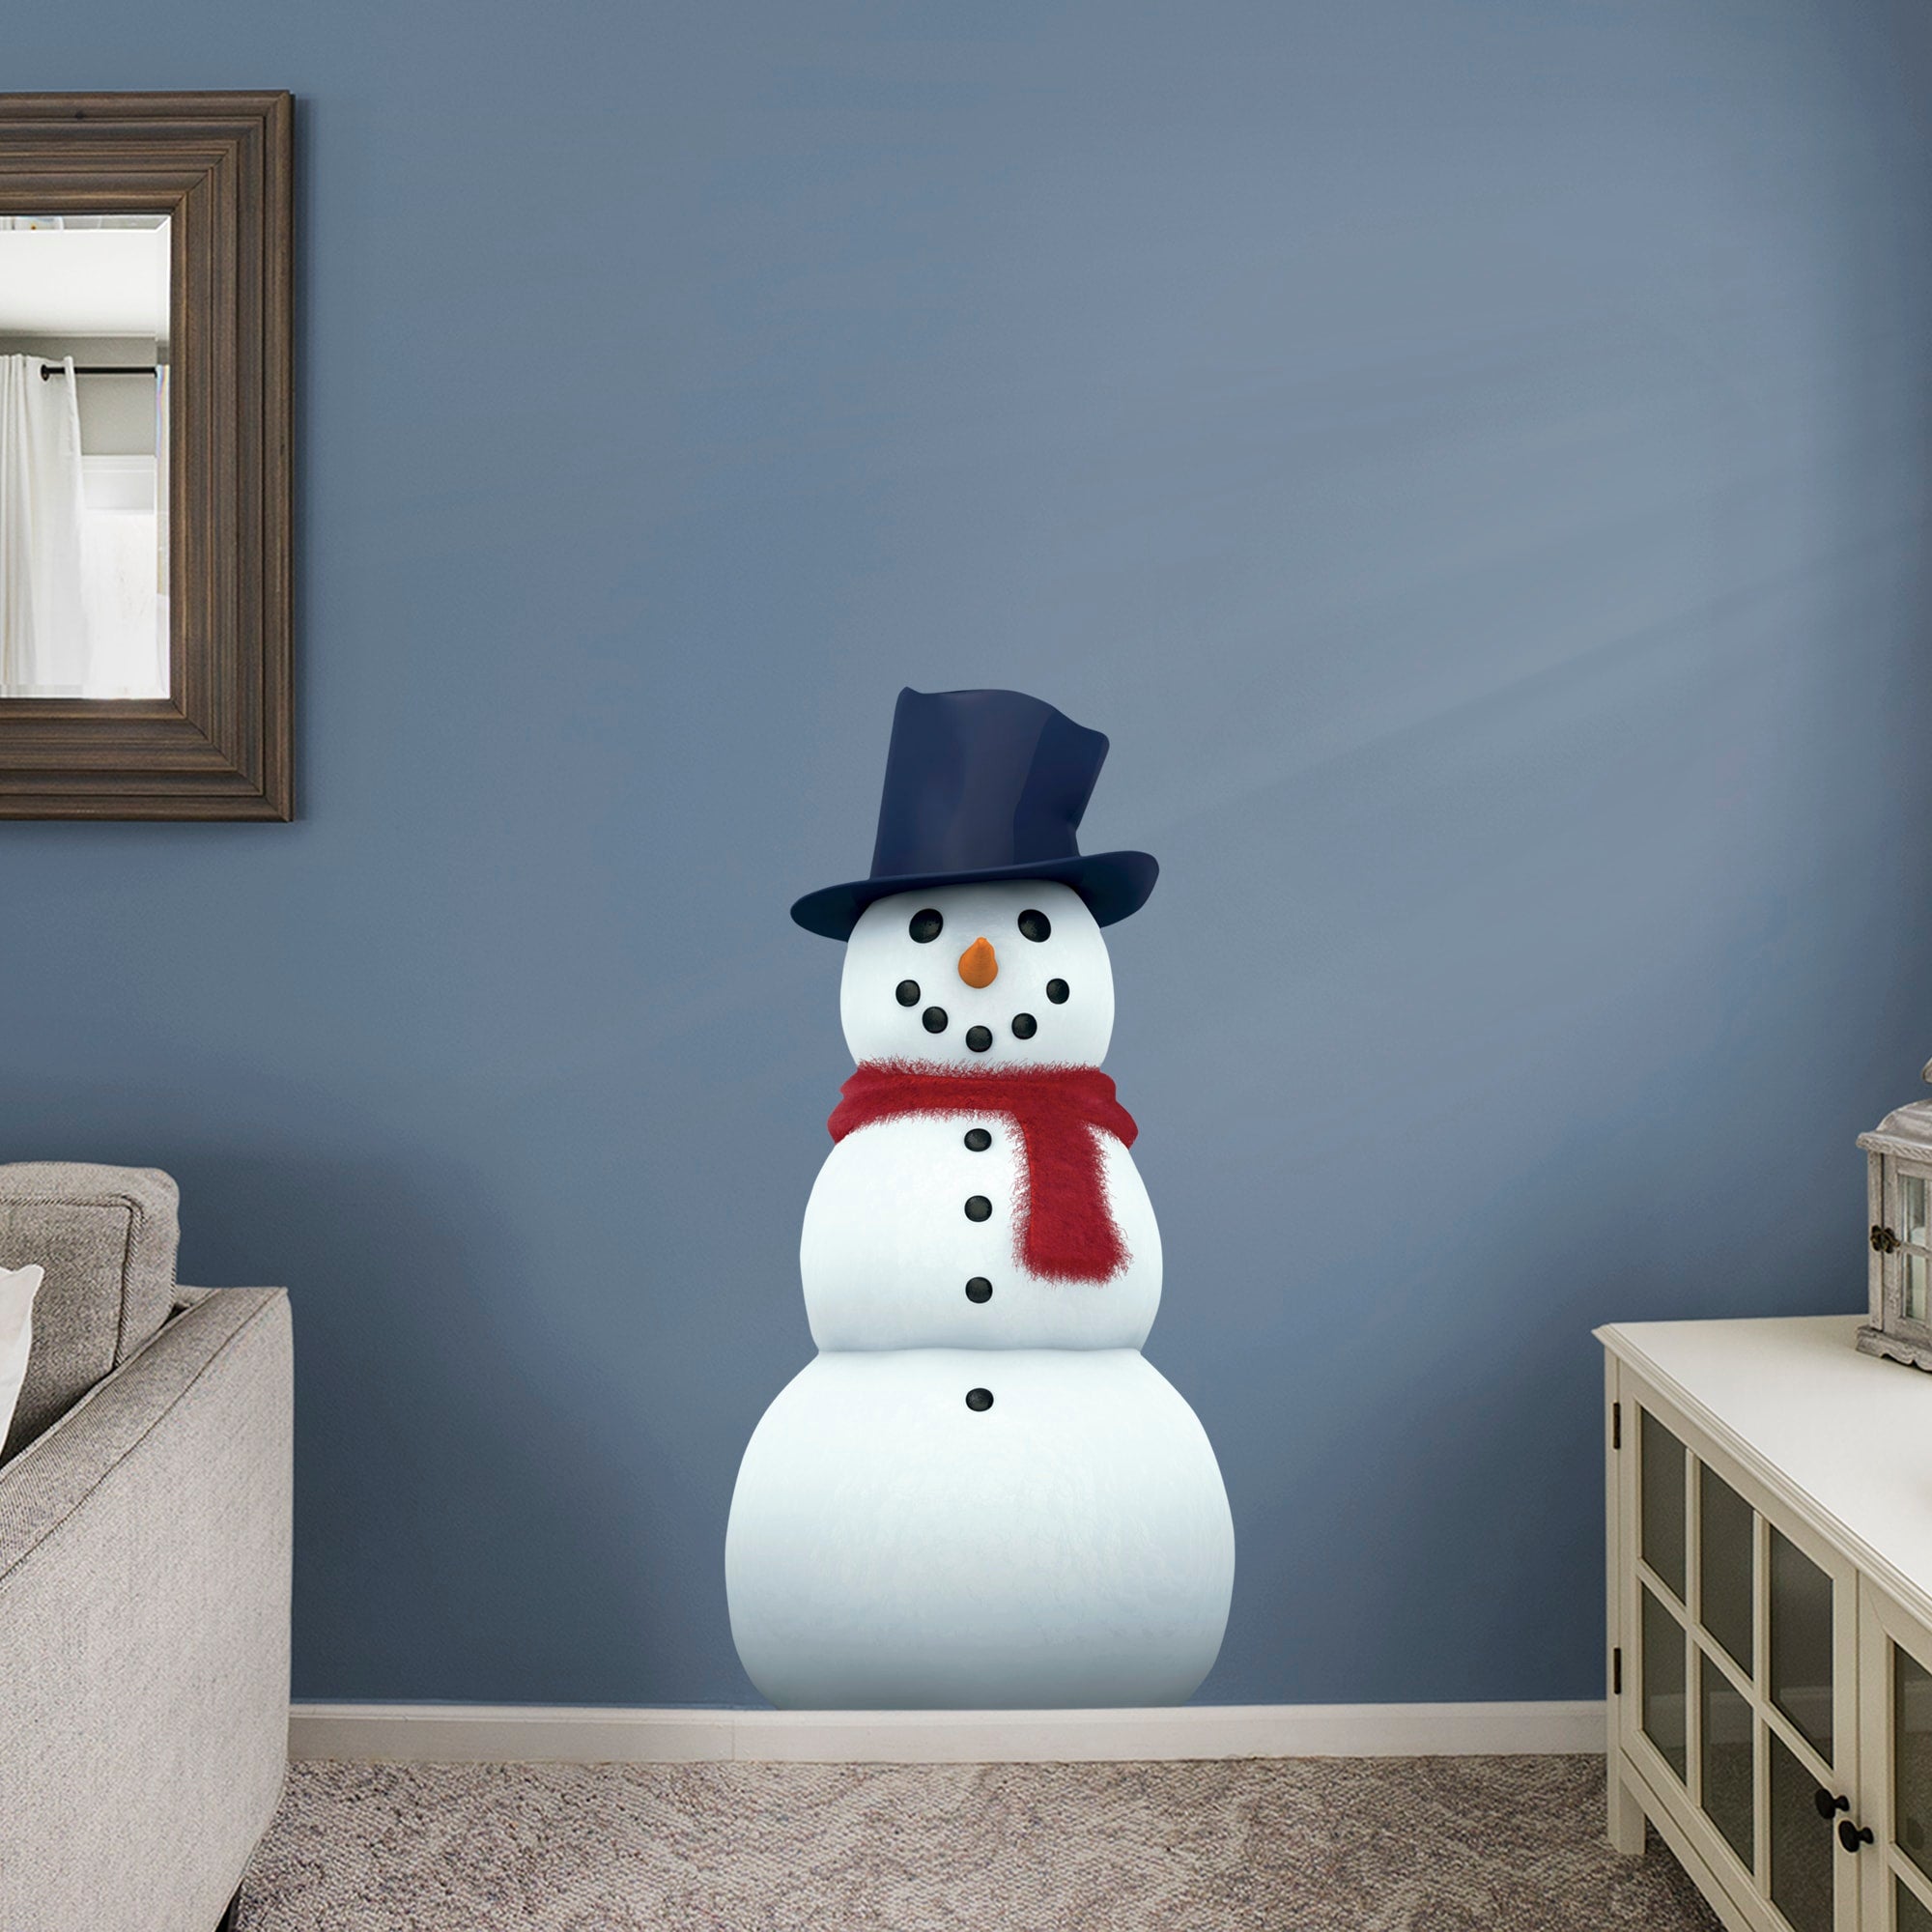 Snowman - Removable Vinyl Decal Giant Character (25"W x 50"H) by Fathead